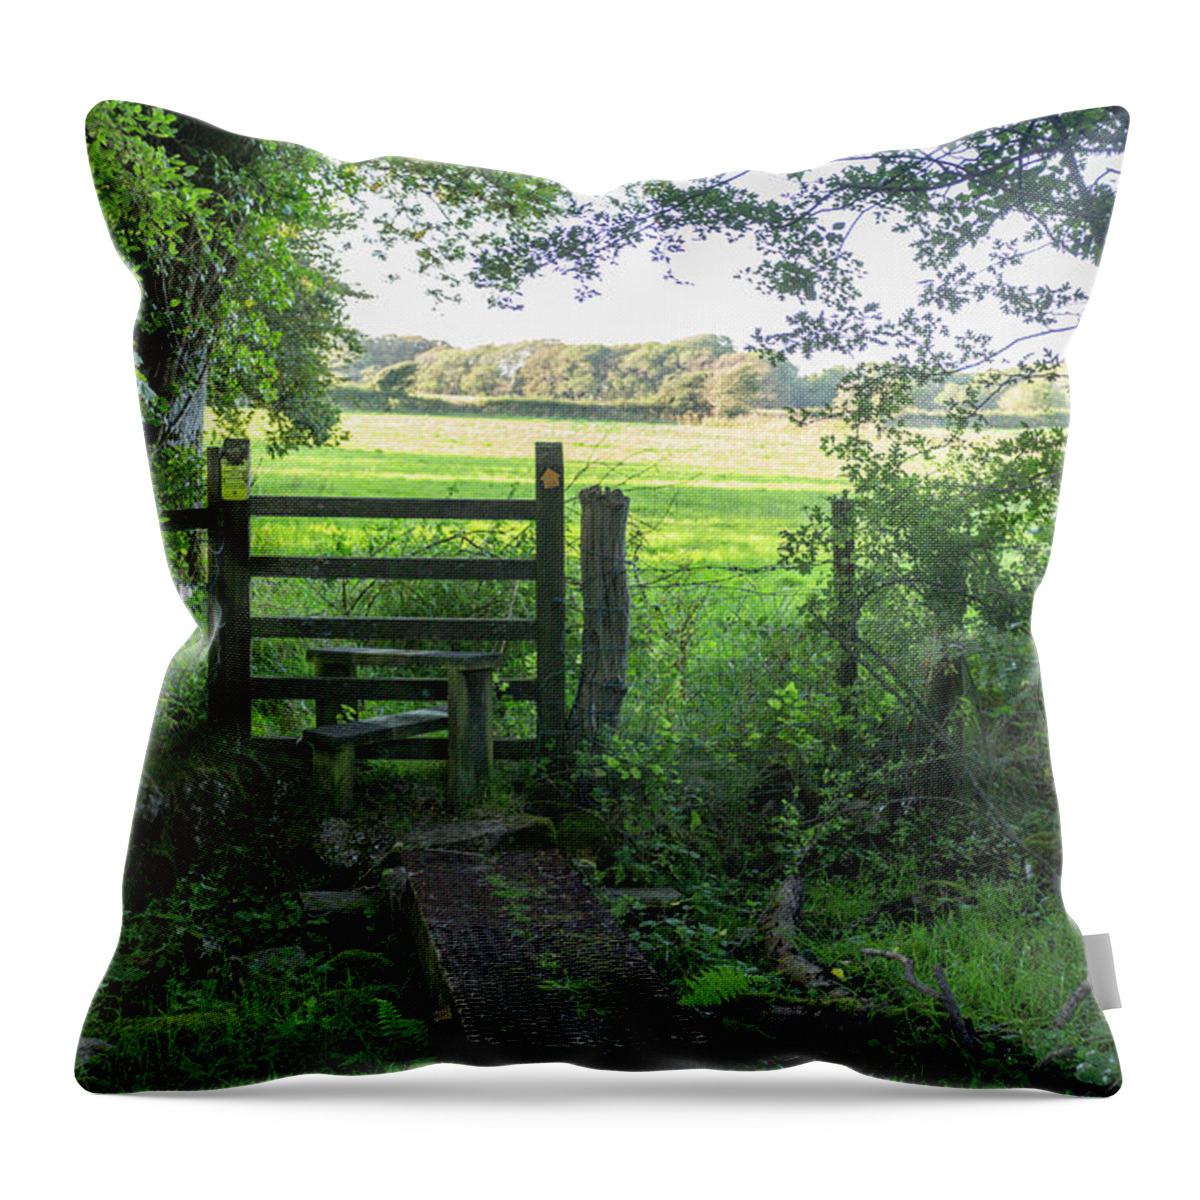 Stile Throw Pillow featuring the photograph Stile between fields in Britain by Paul Cowan